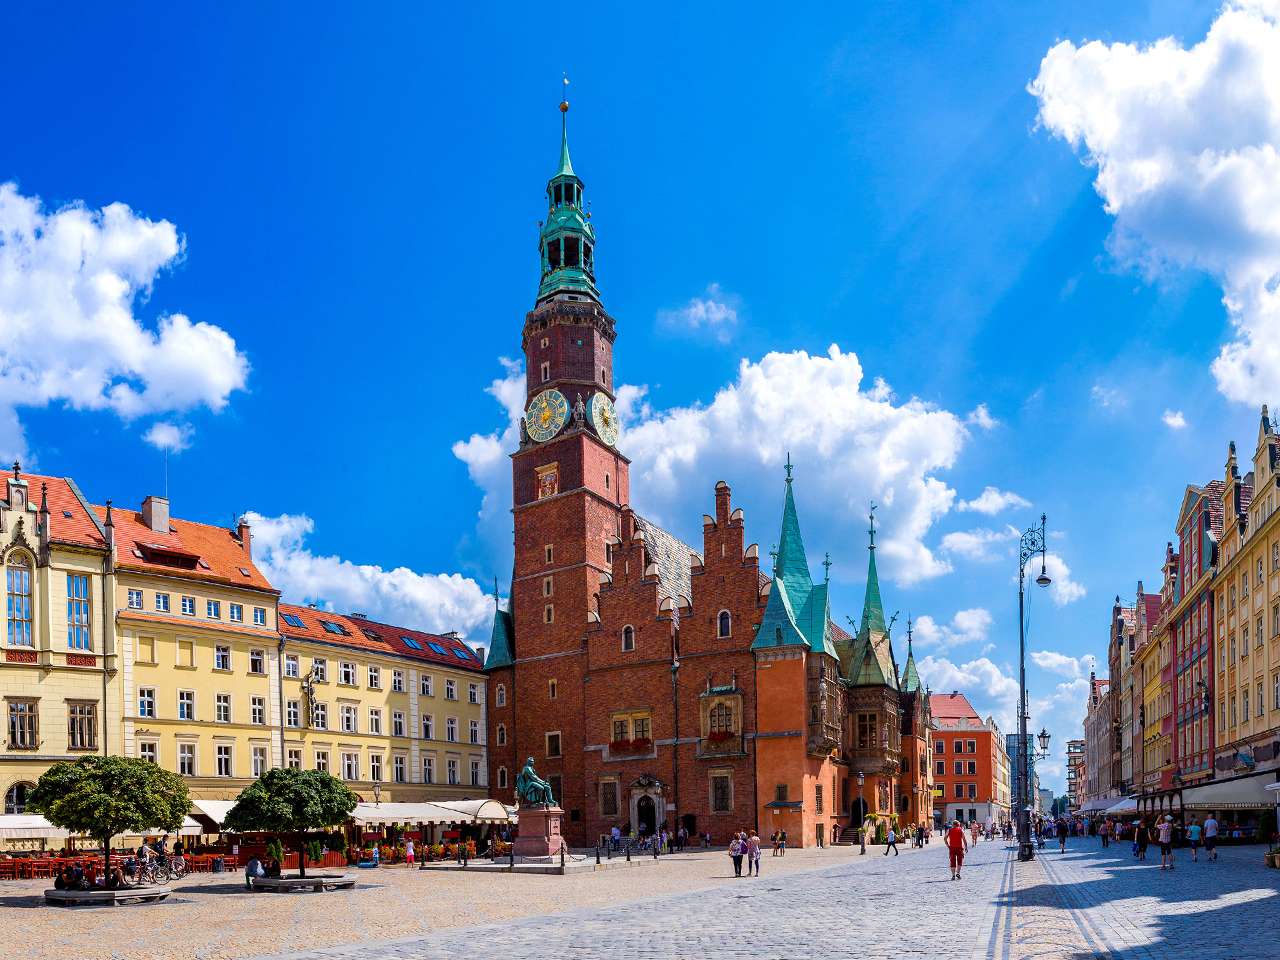 Old town square jigsaw puzzle online